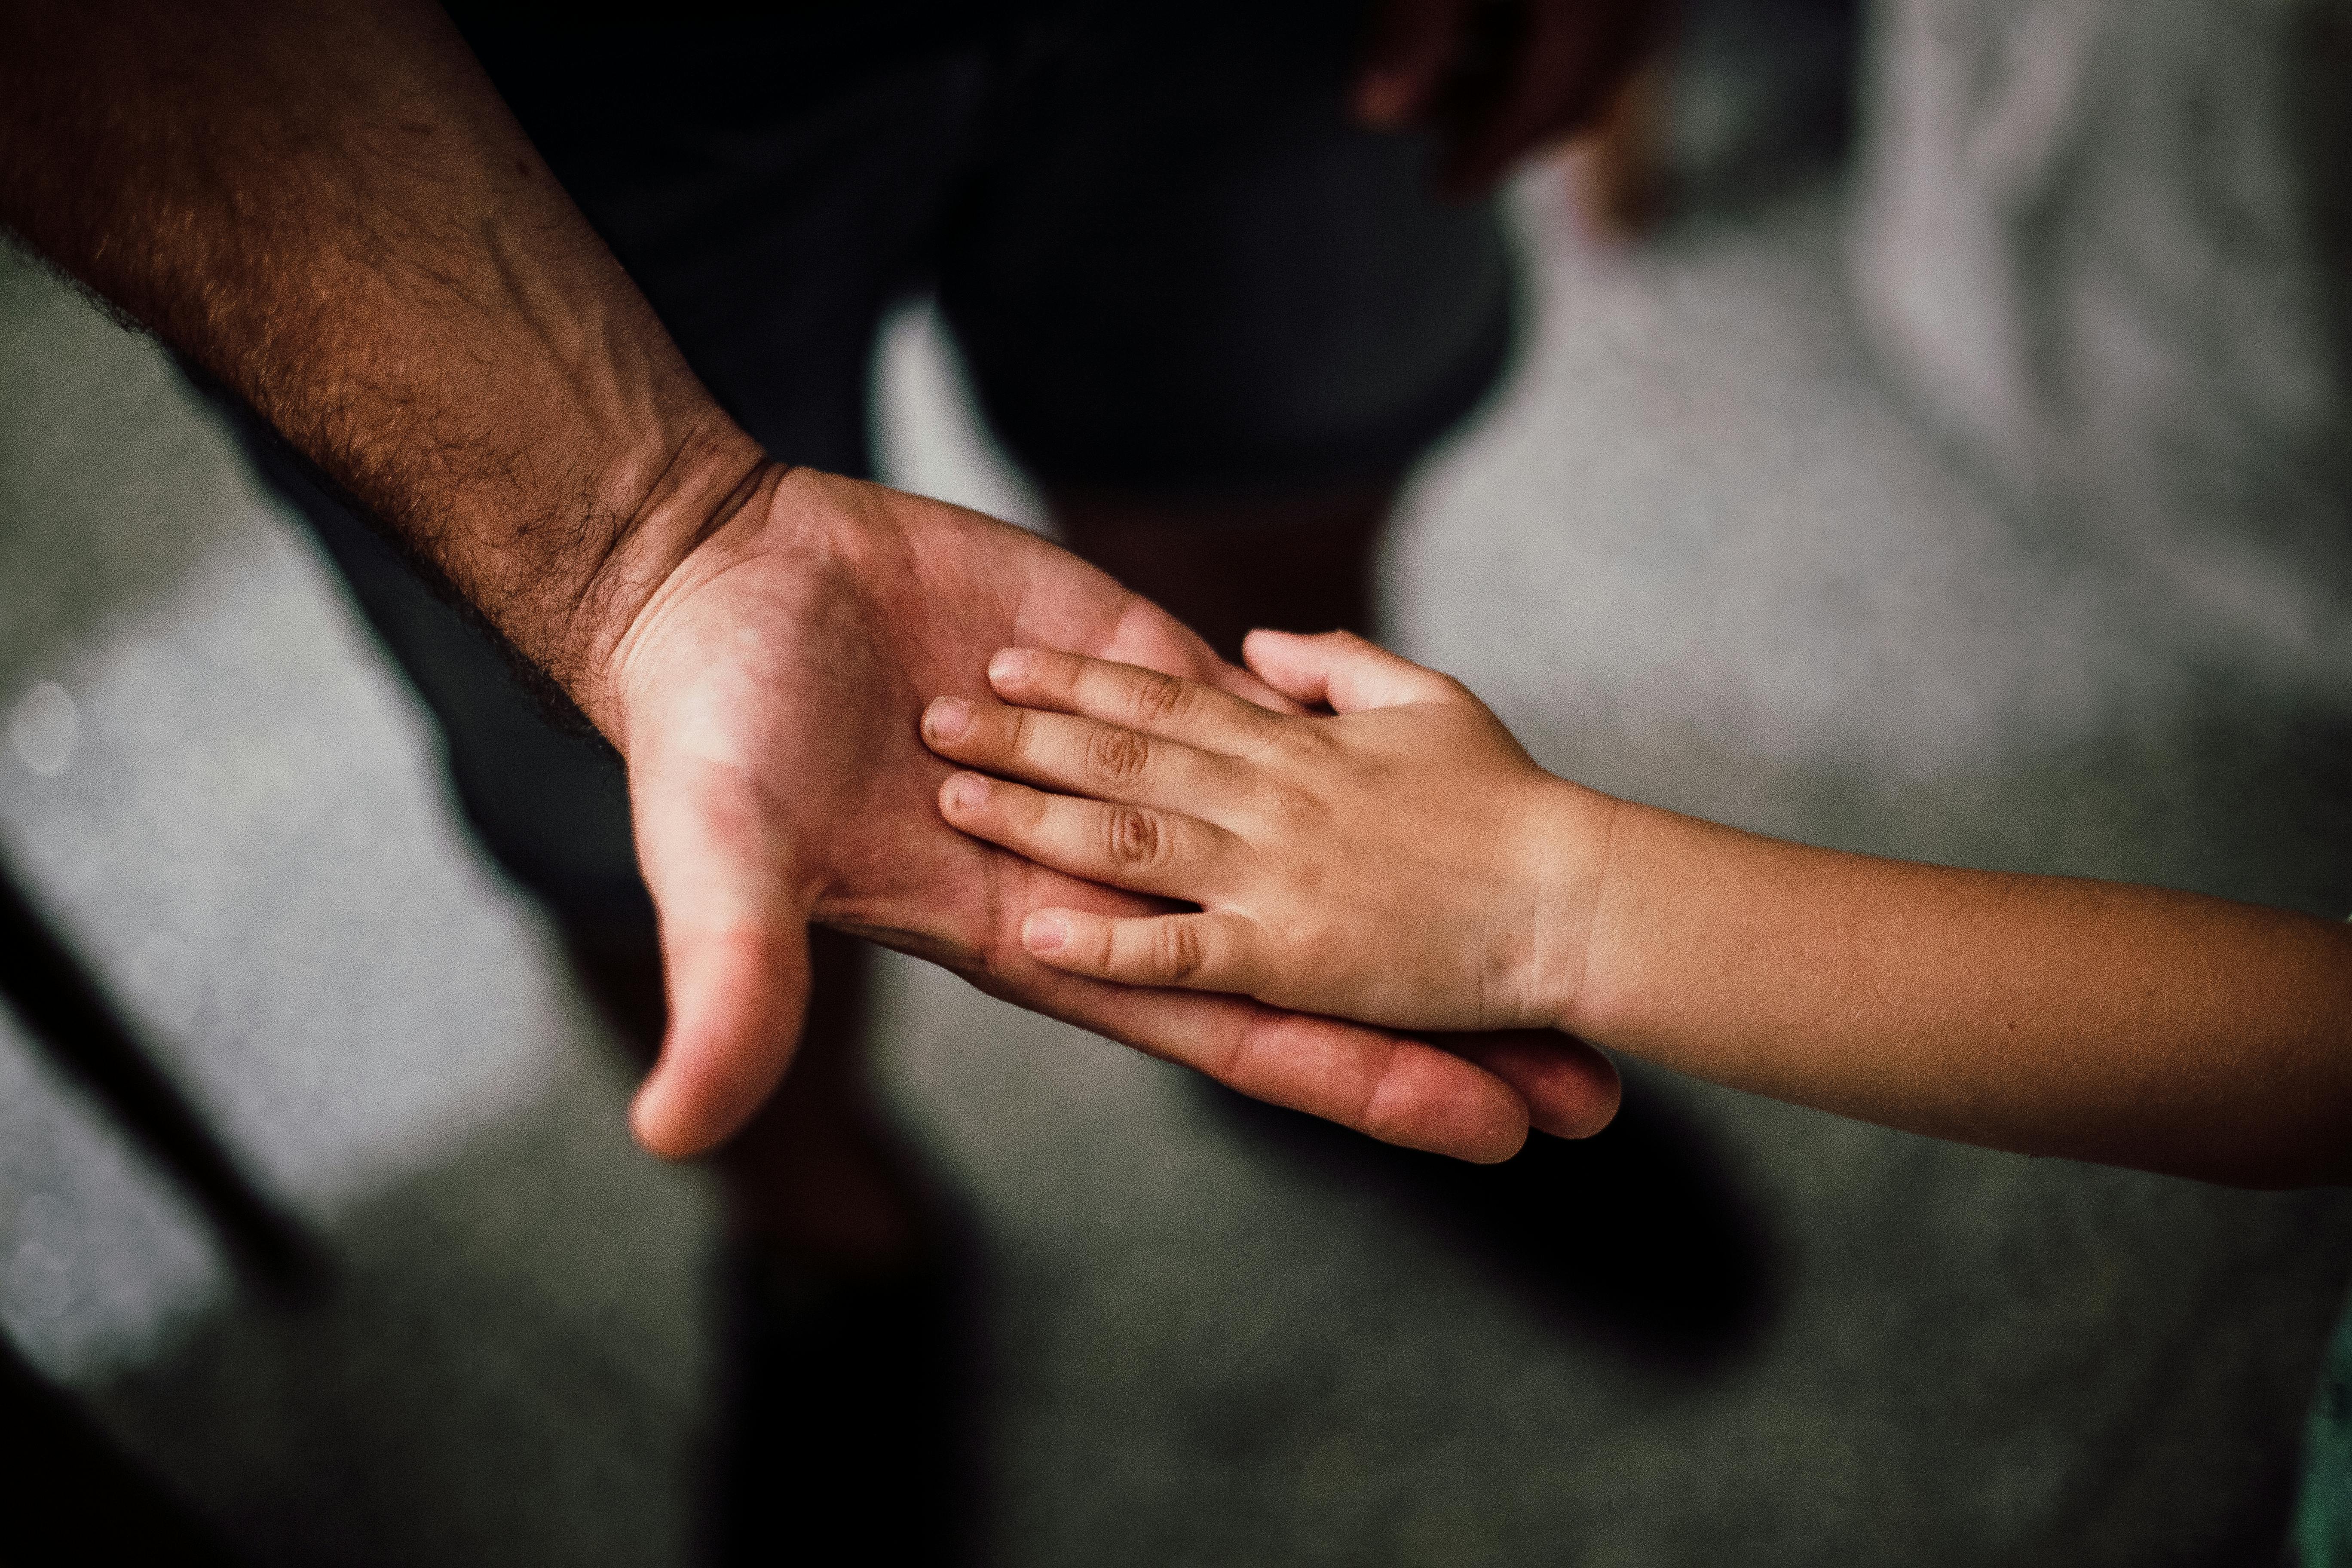 A child's hand on his father's palm. | Photo: Pexels